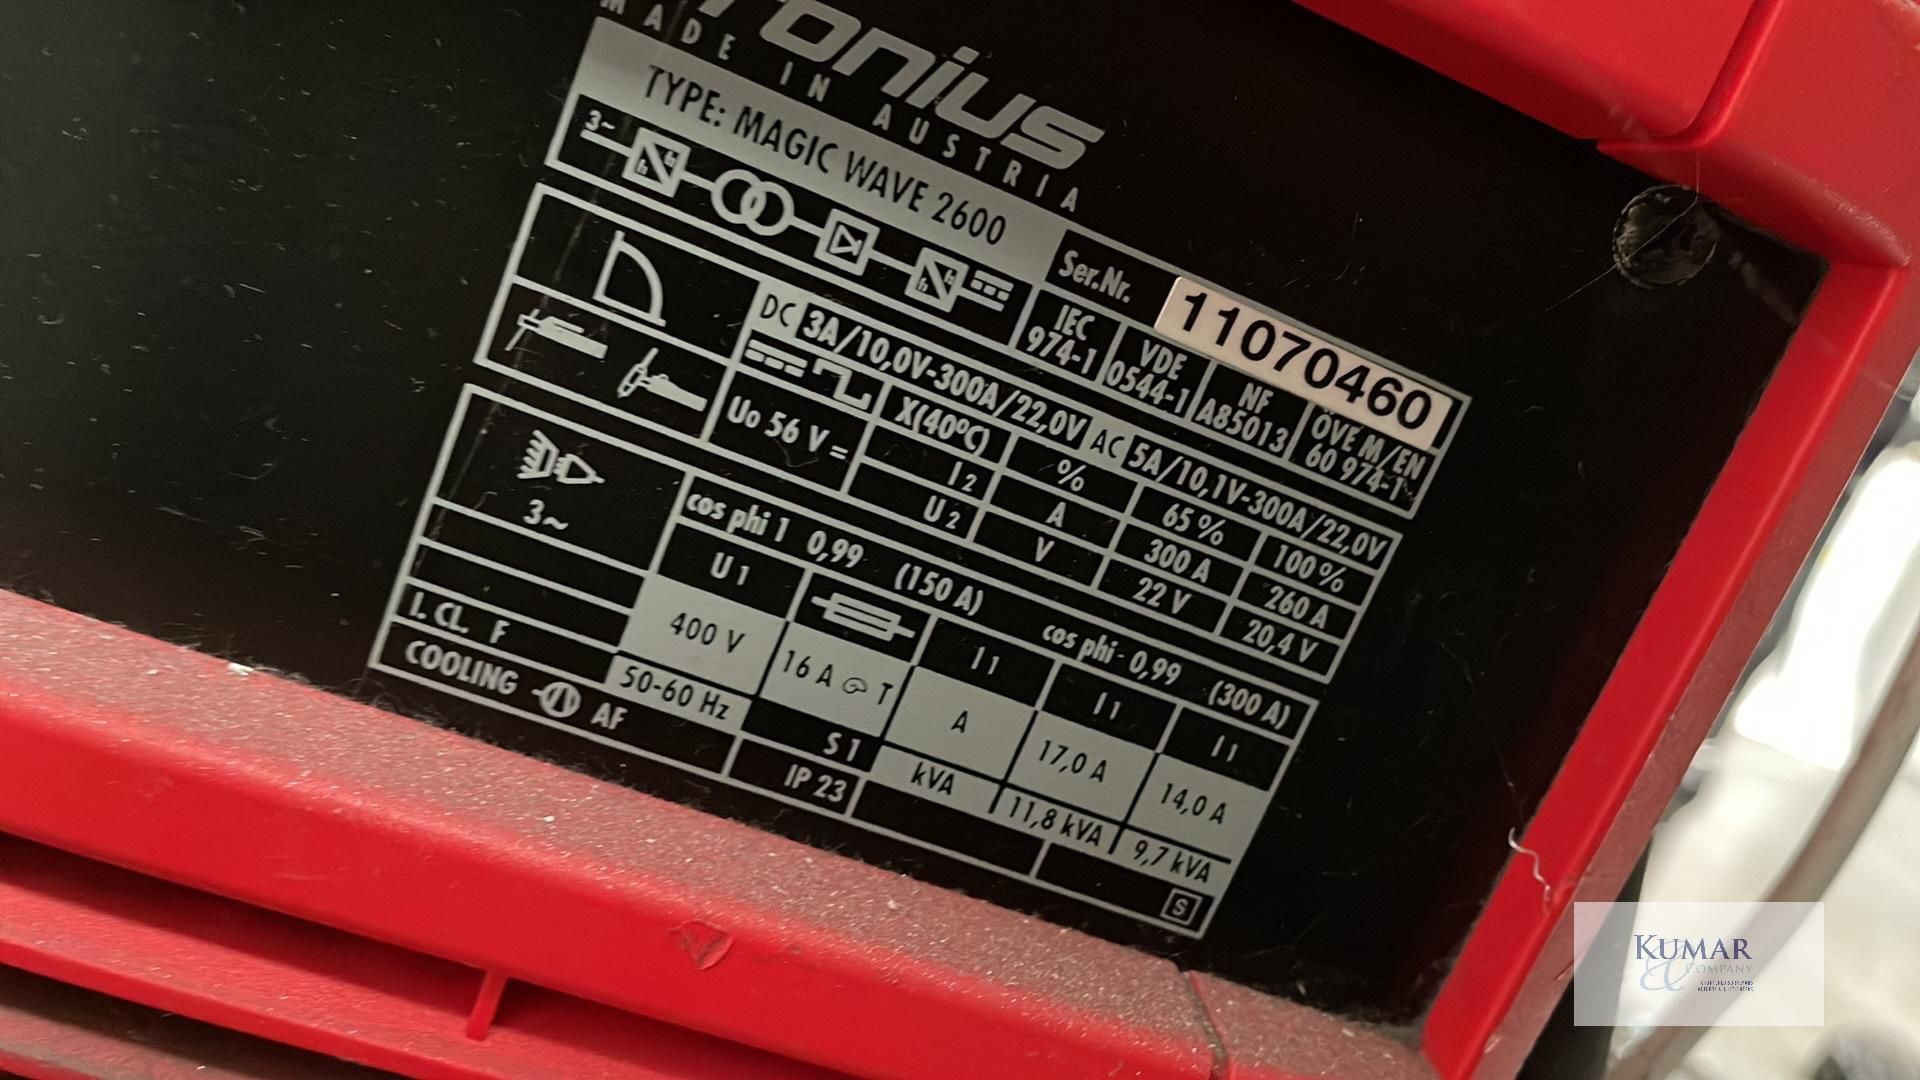 Fronius Magic Wave 2600 Water Cooled AC/DC Tig Power Source Serial No.11074060 - Does Not Include - Image 2 of 6